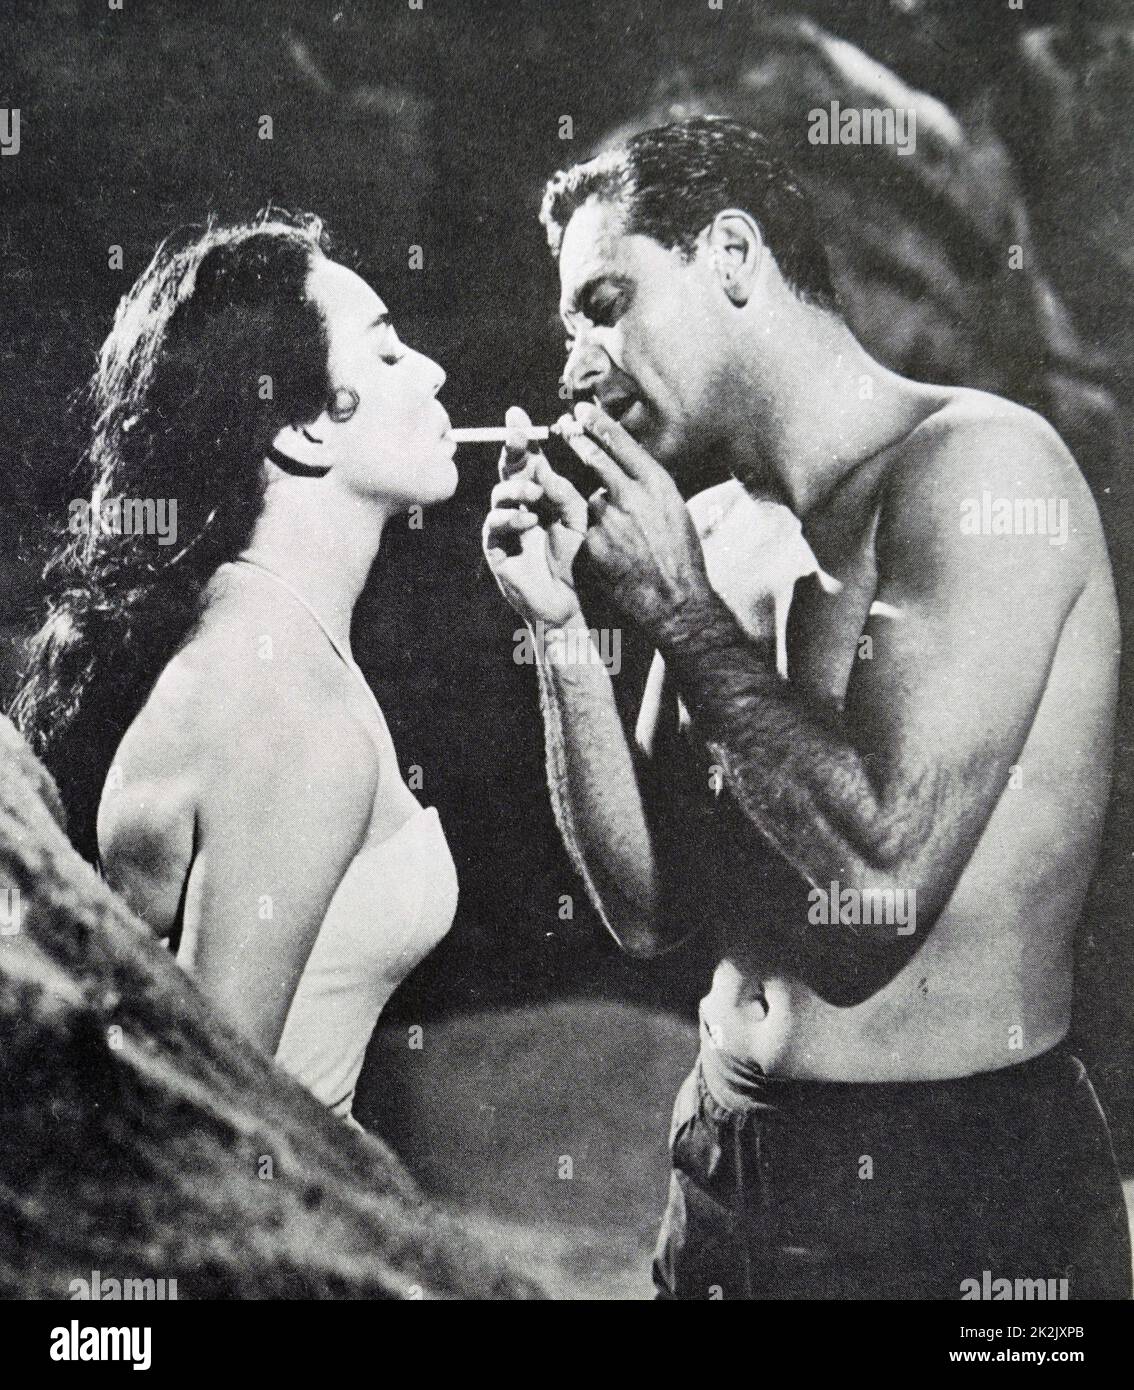 Film still from 'Love Is a Many-Splendored Thing' staring Jennifer Jones and William Holden. Dated 20th Century Stock Photo